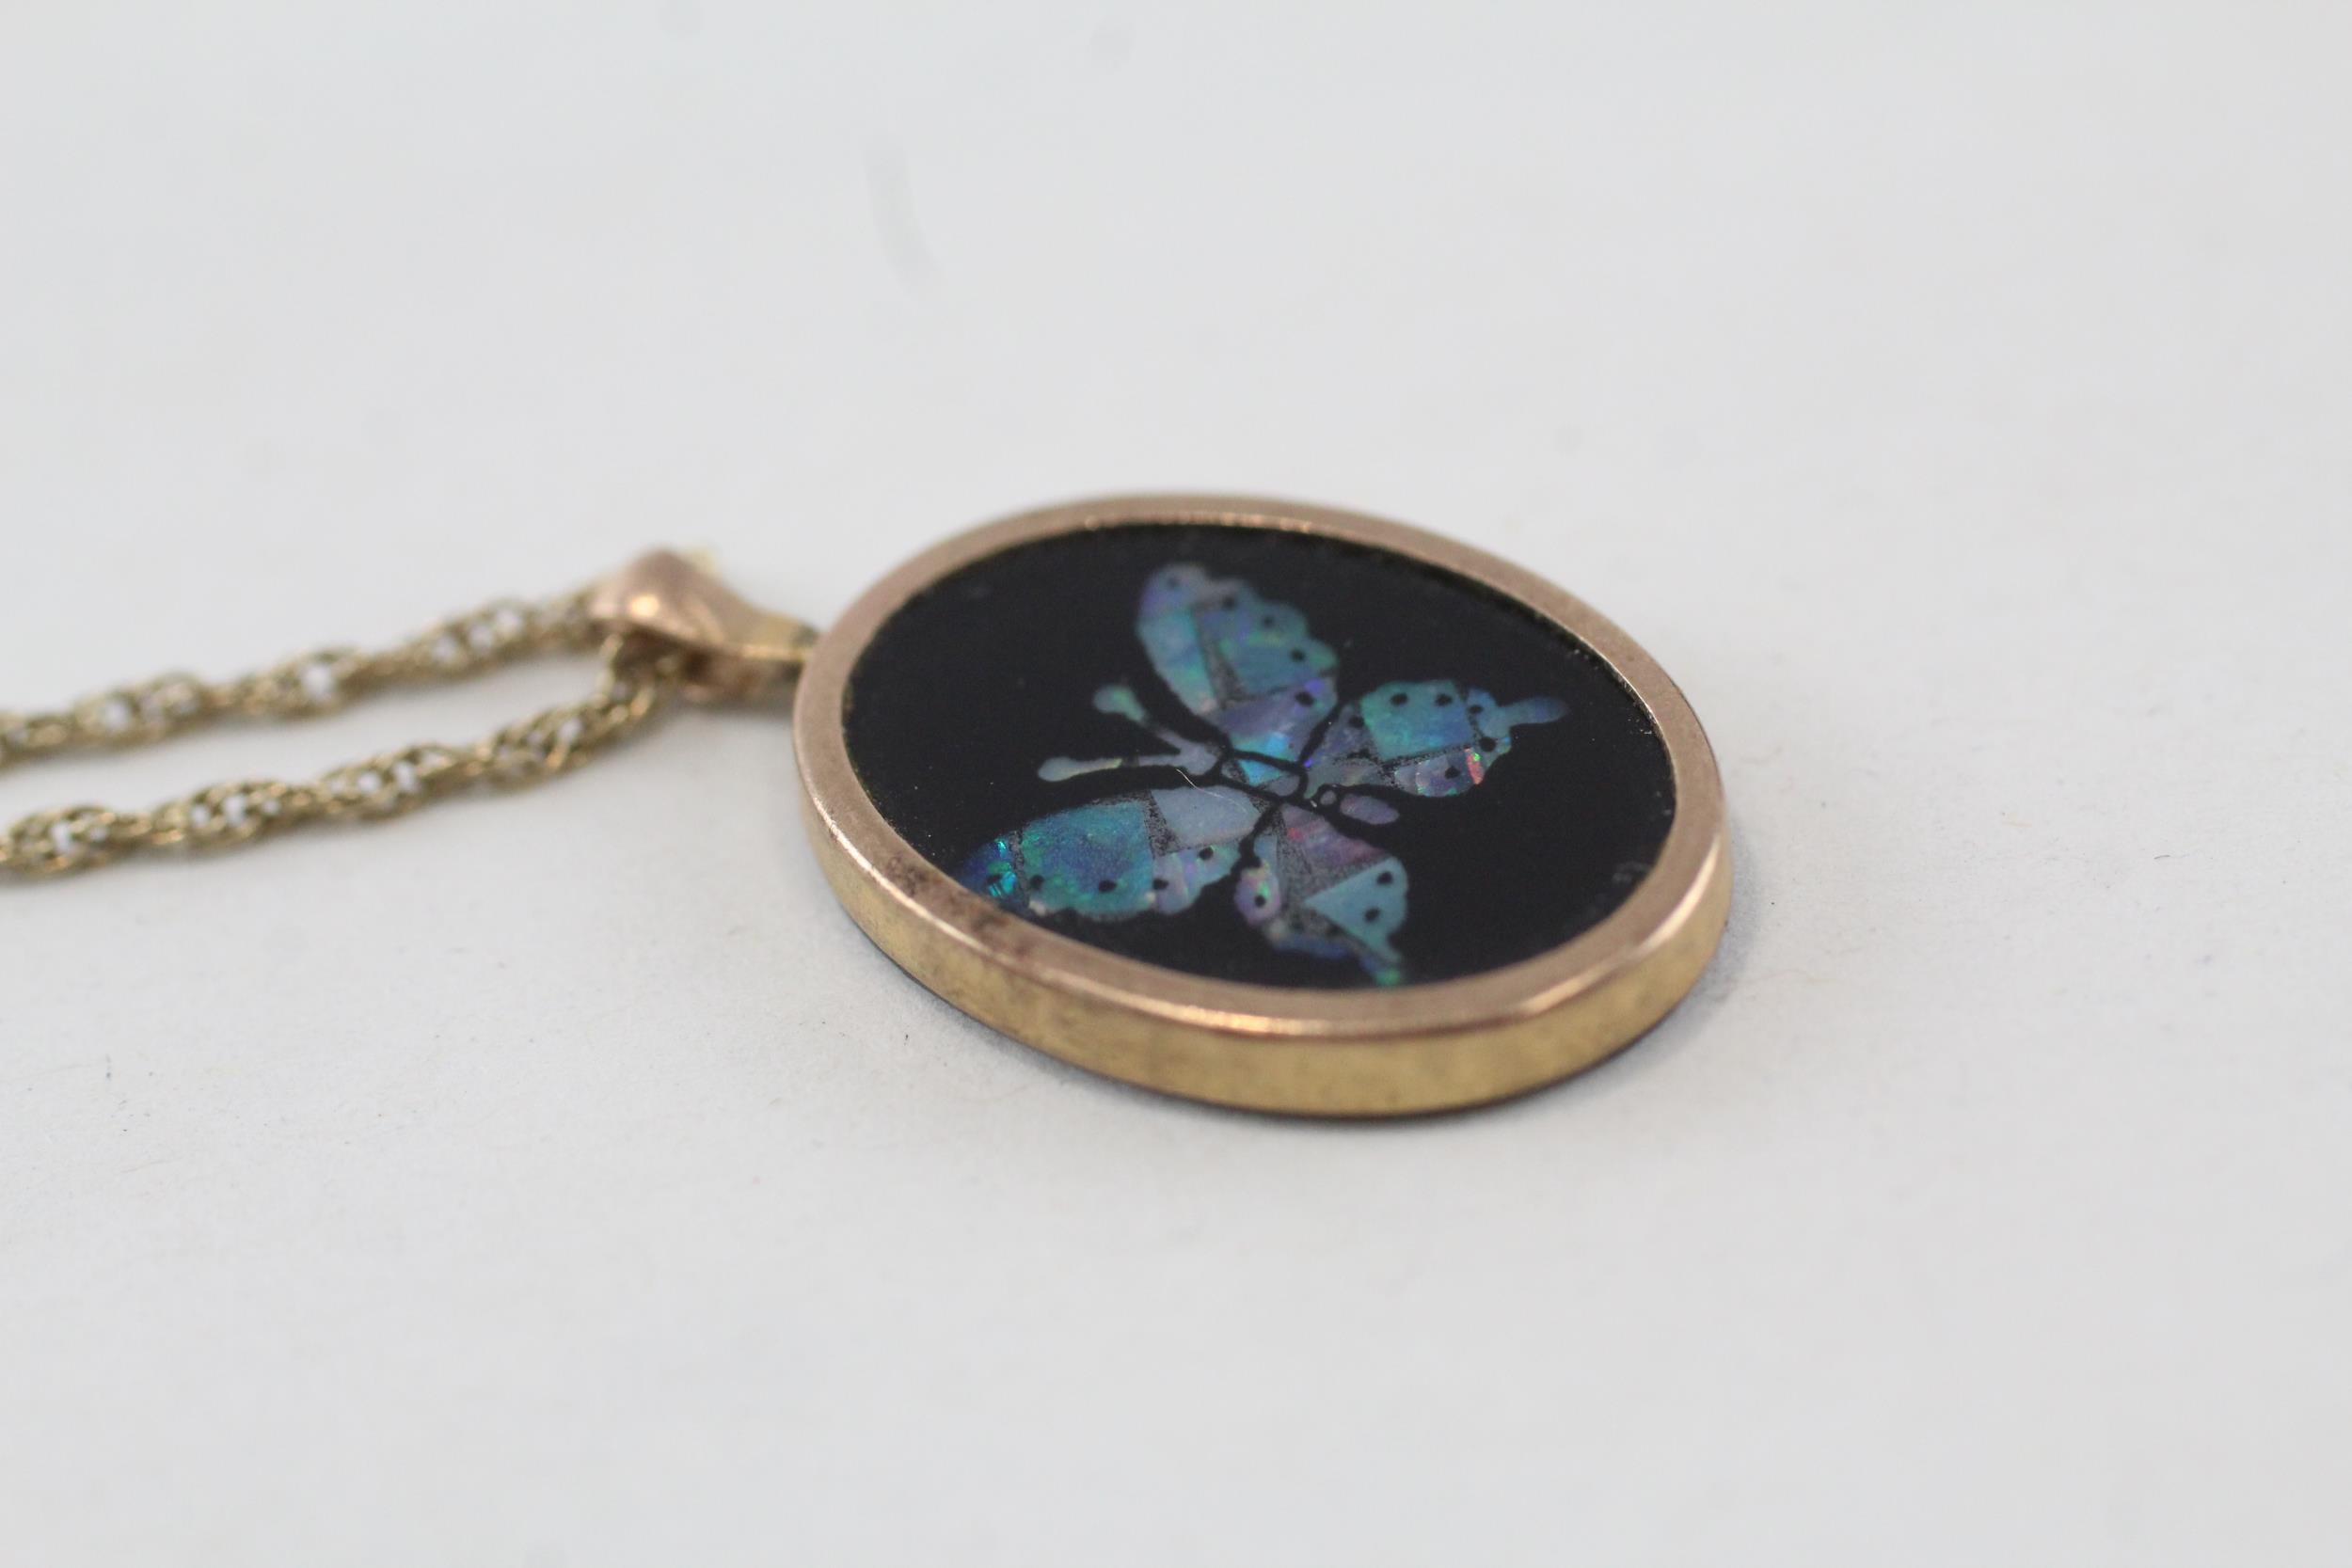 9ct gold opal triplet butterfly pendant necklace - 2.5 g - Image 2 of 4